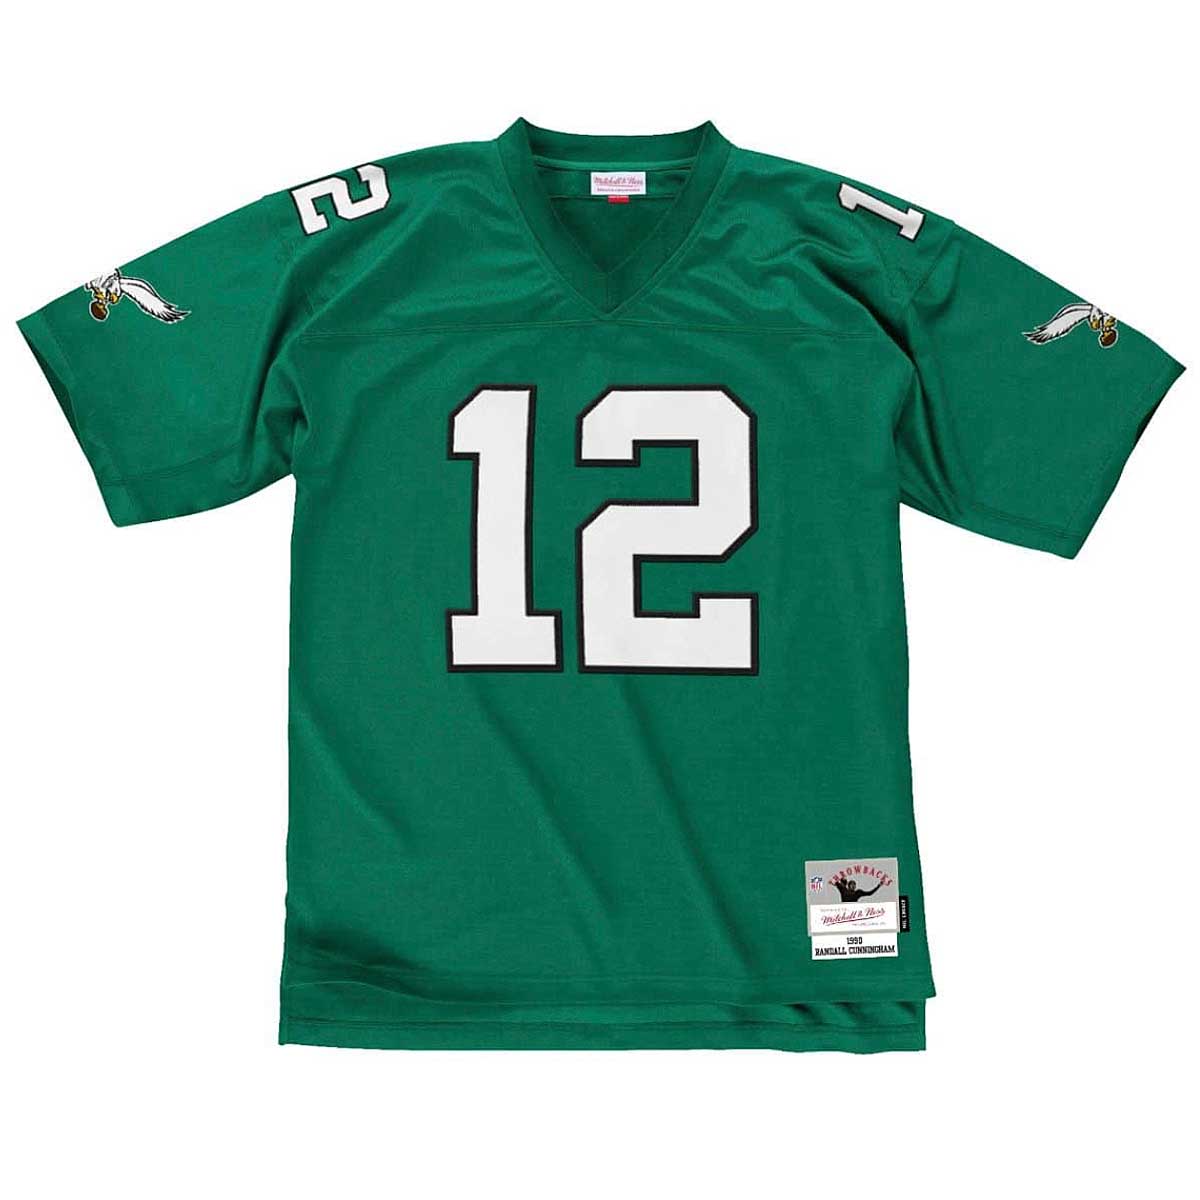 Mitchell And Ness Nfl Legacy Jersey Philadelphia Eagles - R. Cunnigham, Green